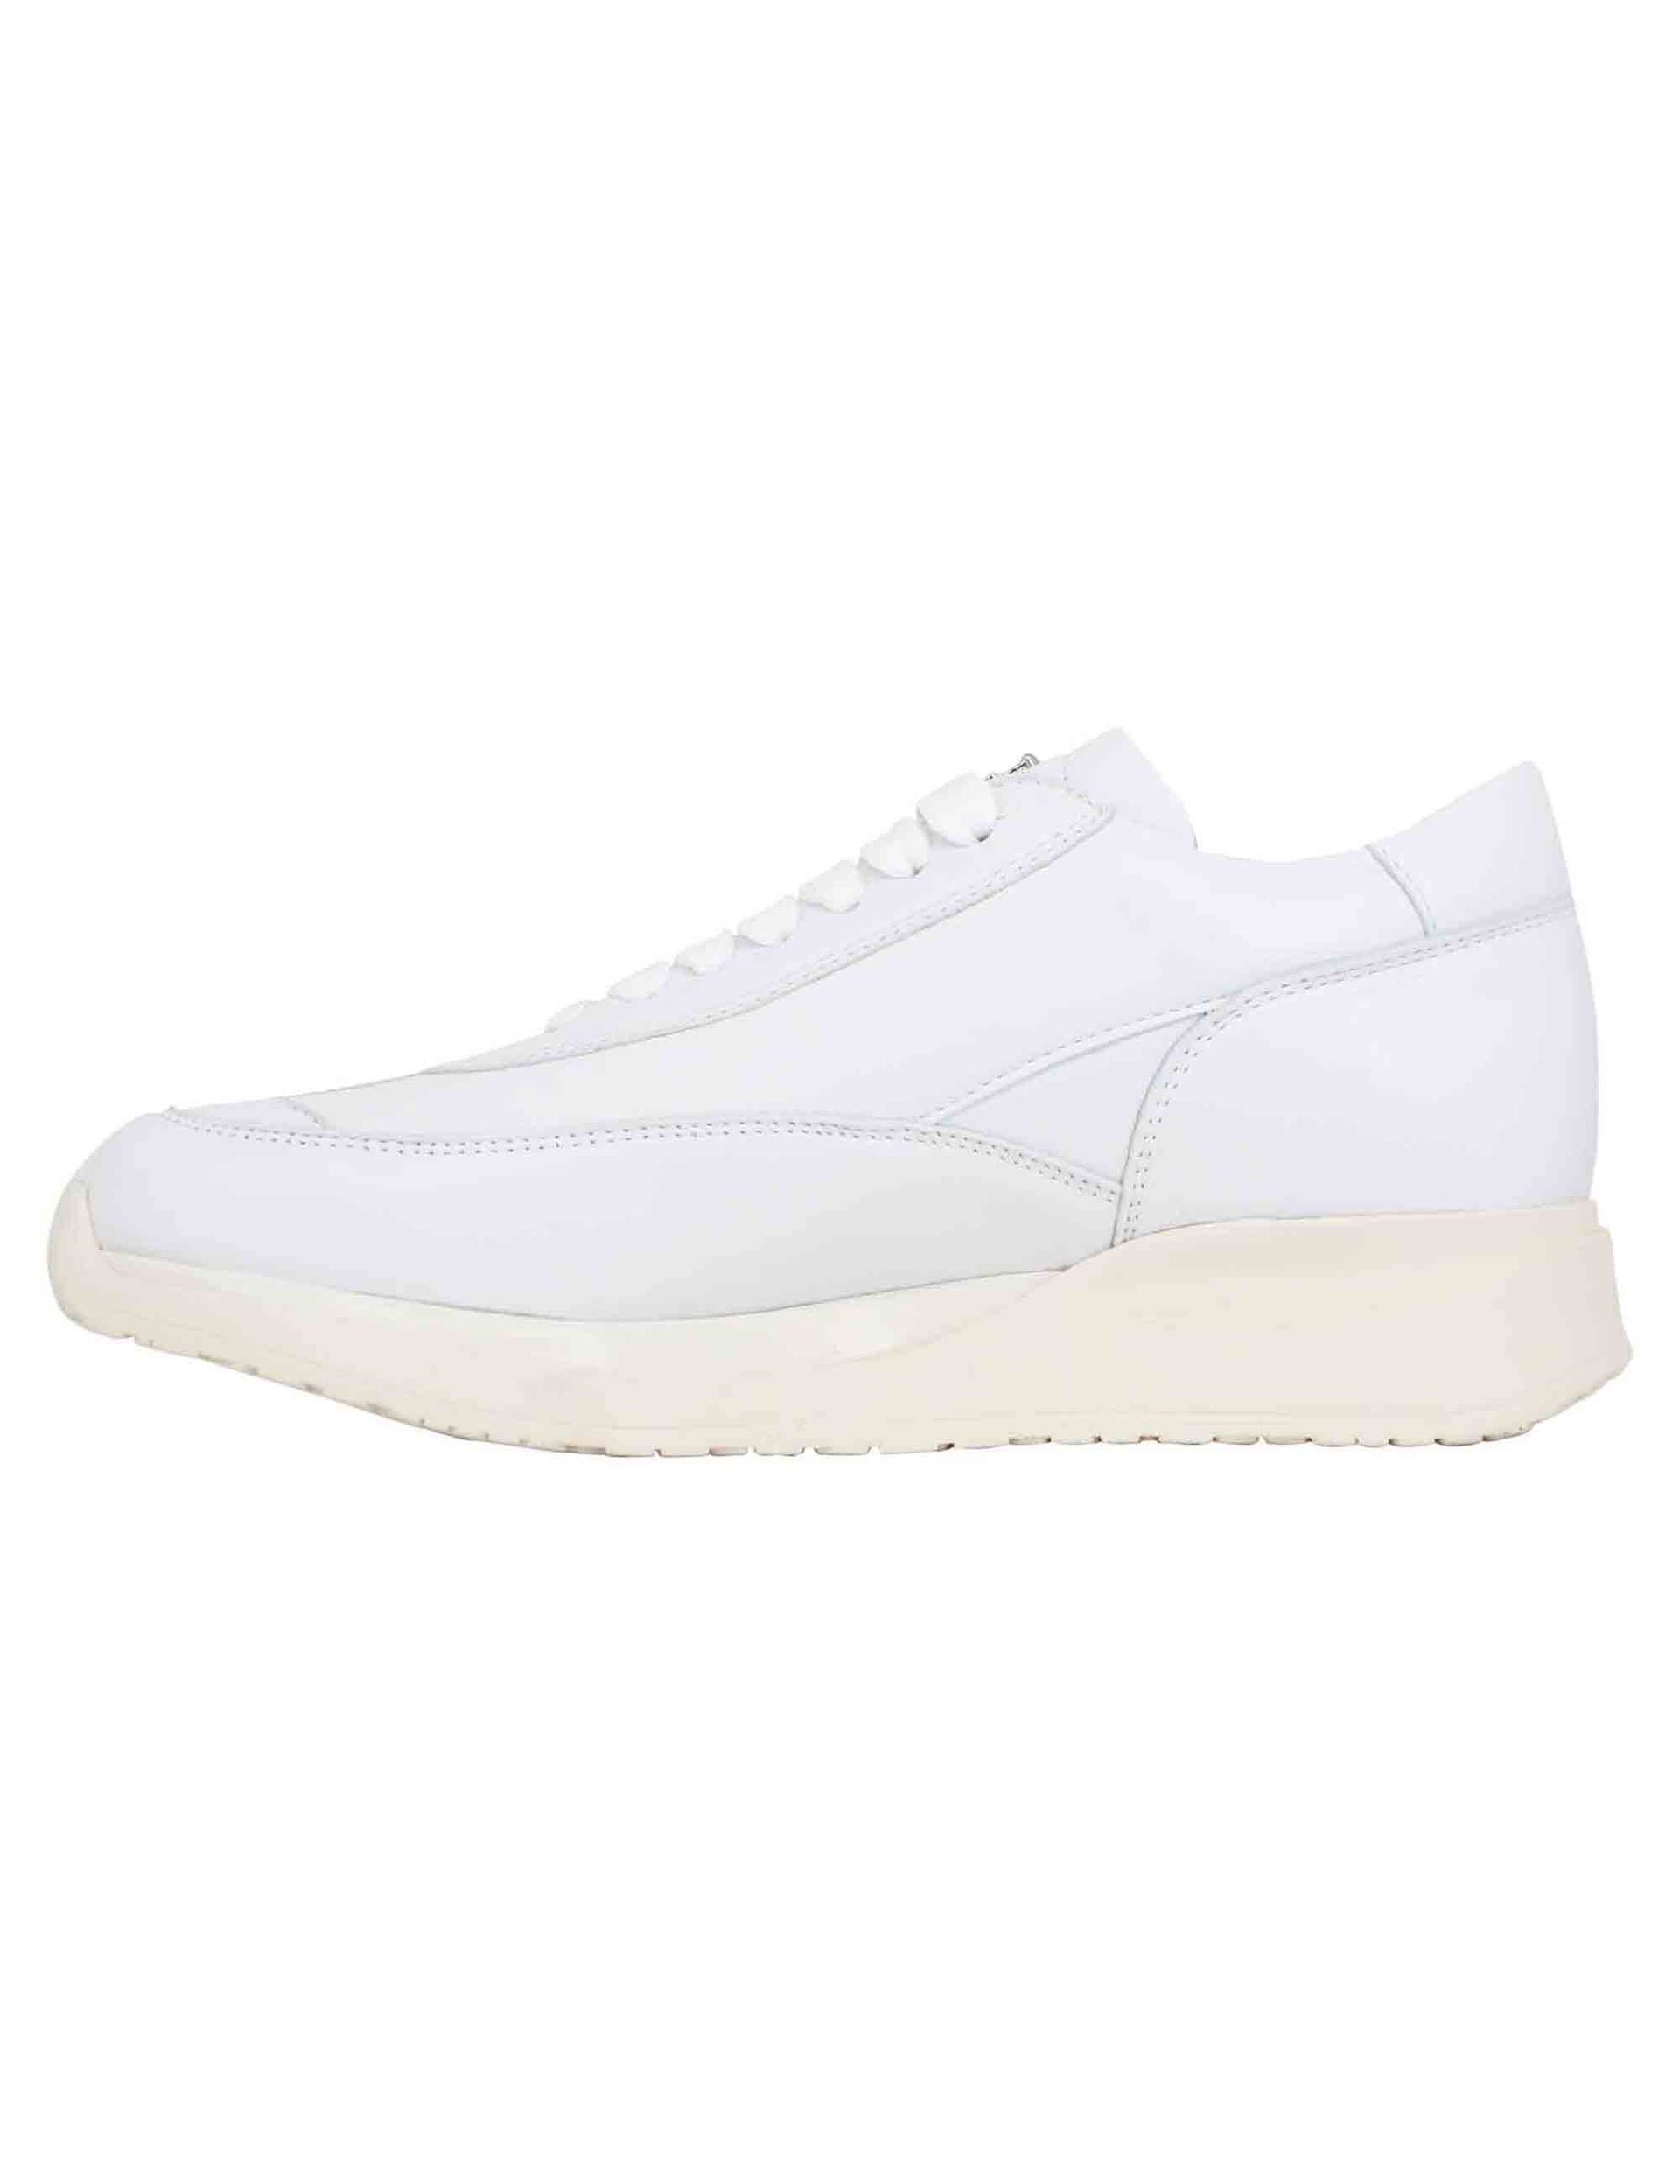 Women's sneakers in white laminated leather